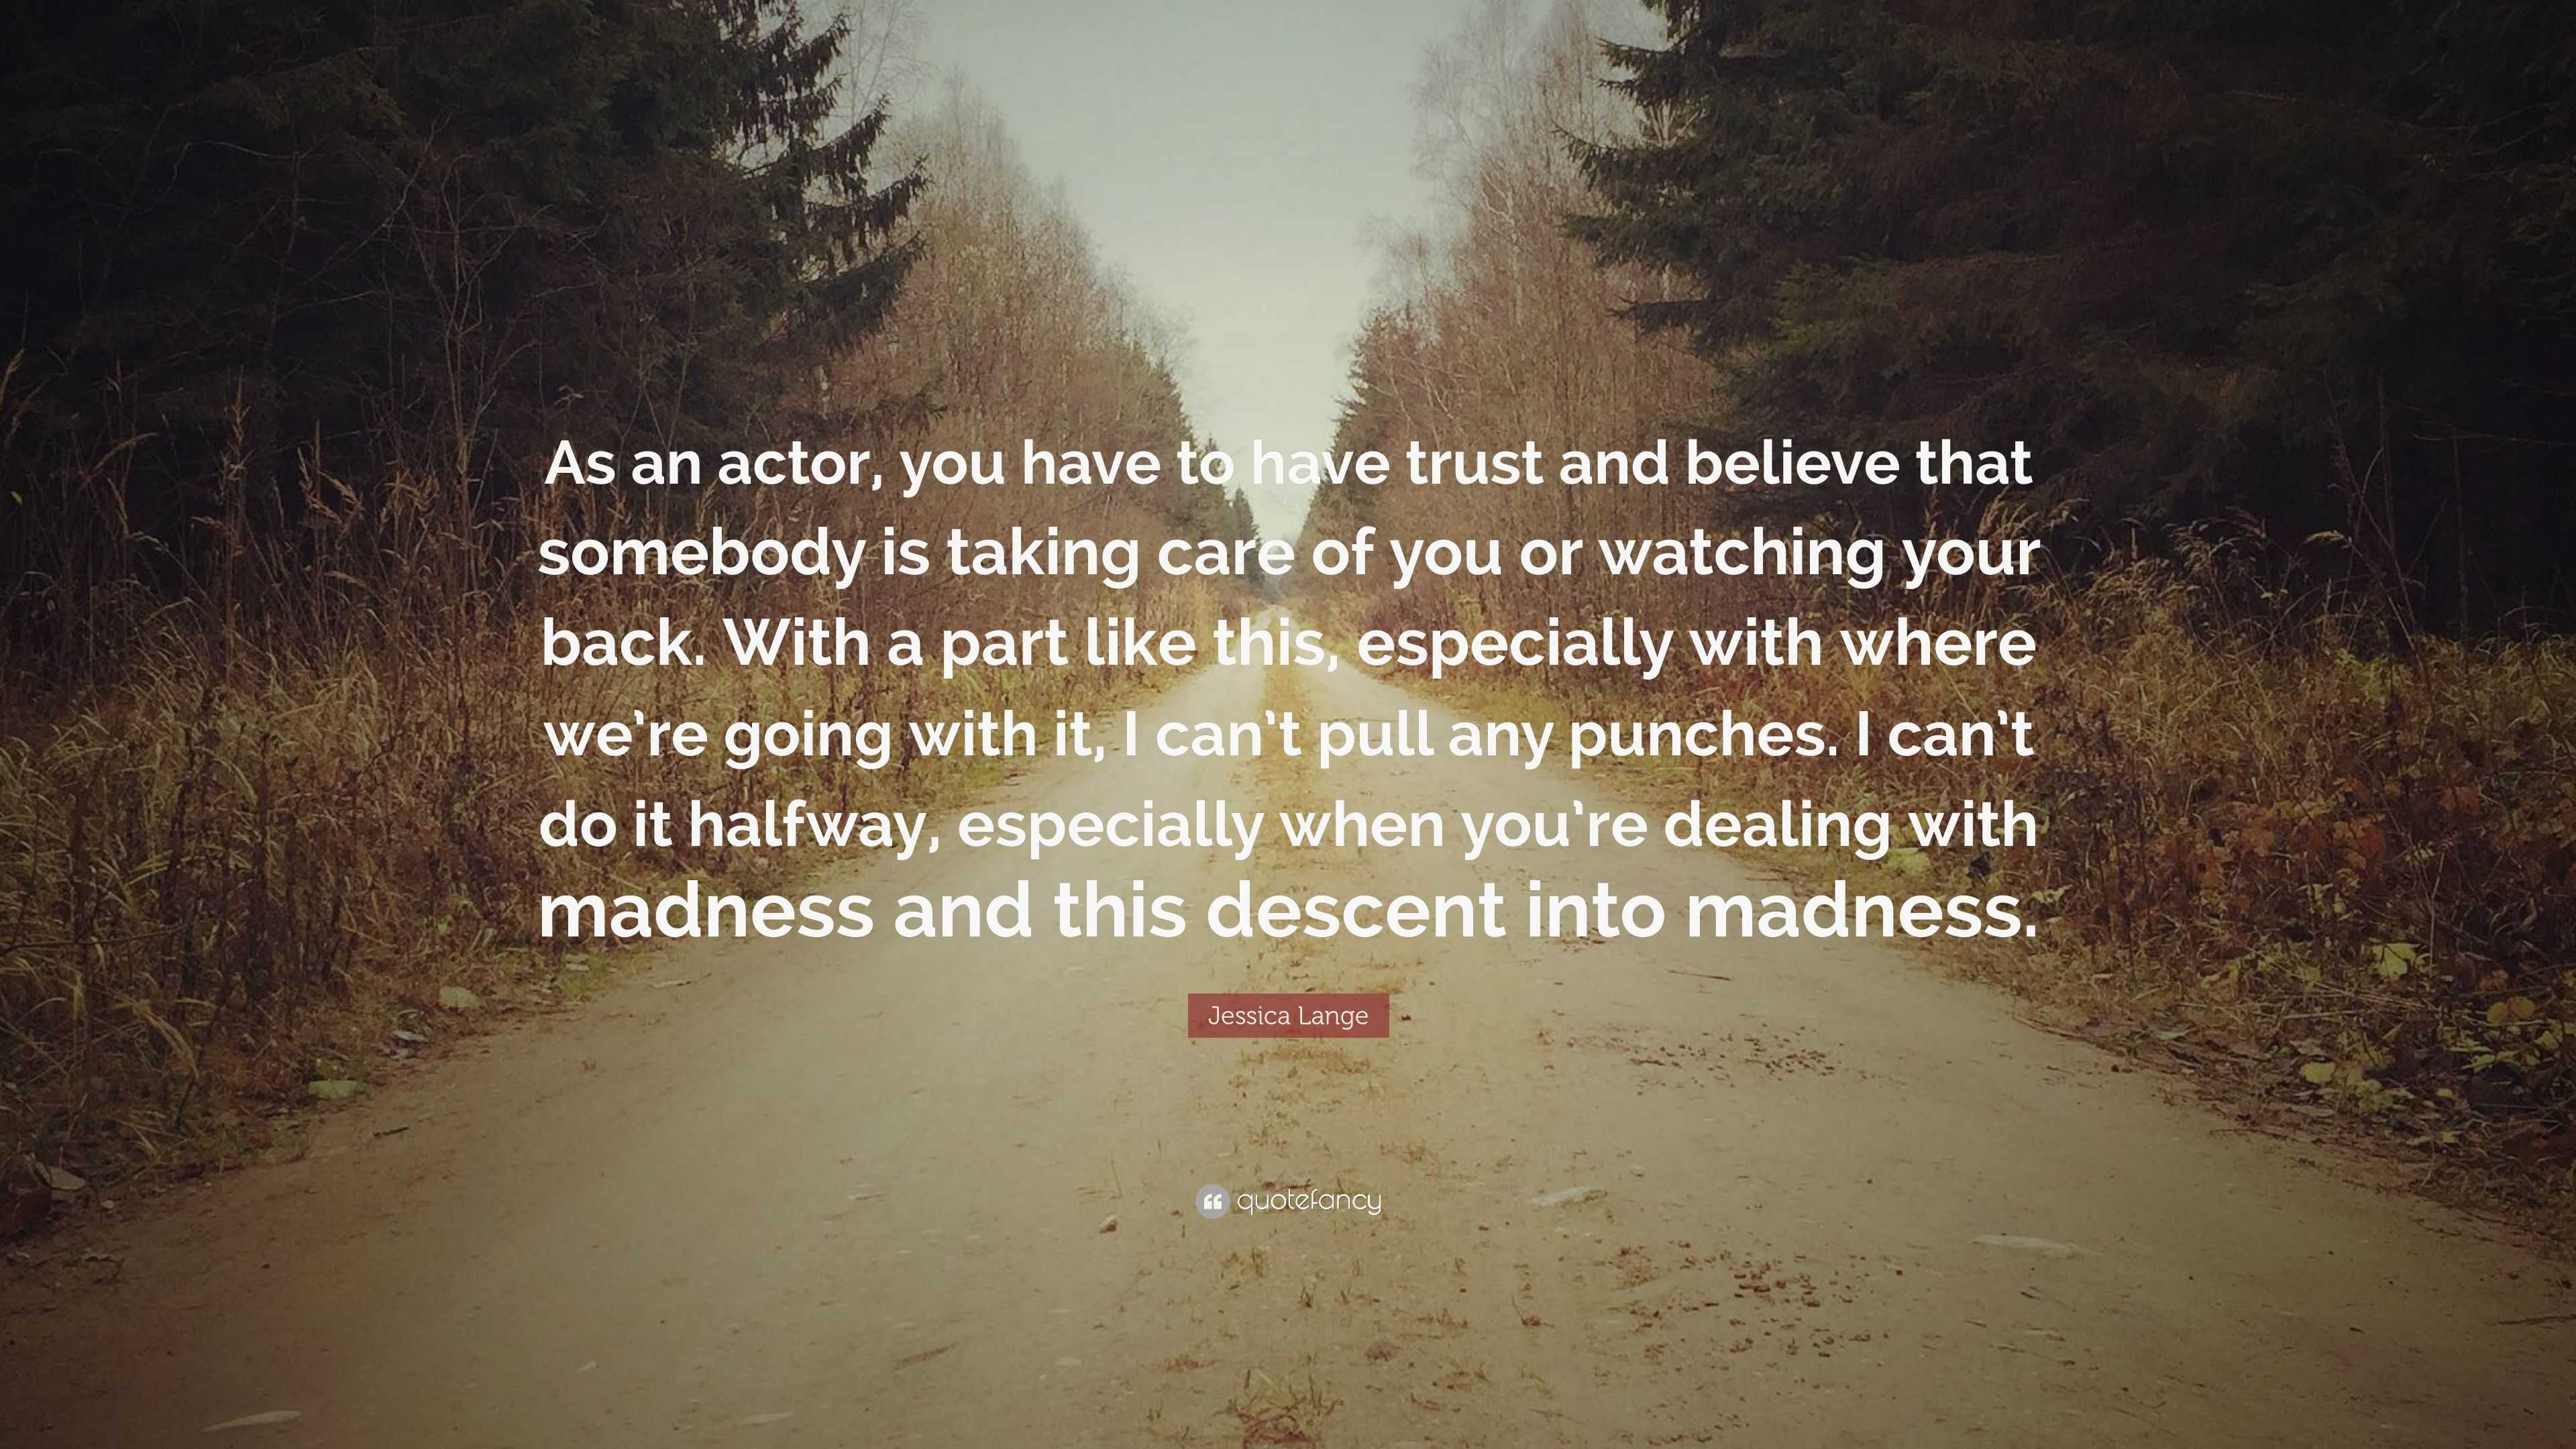 Jessica Lange Quote “As an actor, you have to have trust and believe